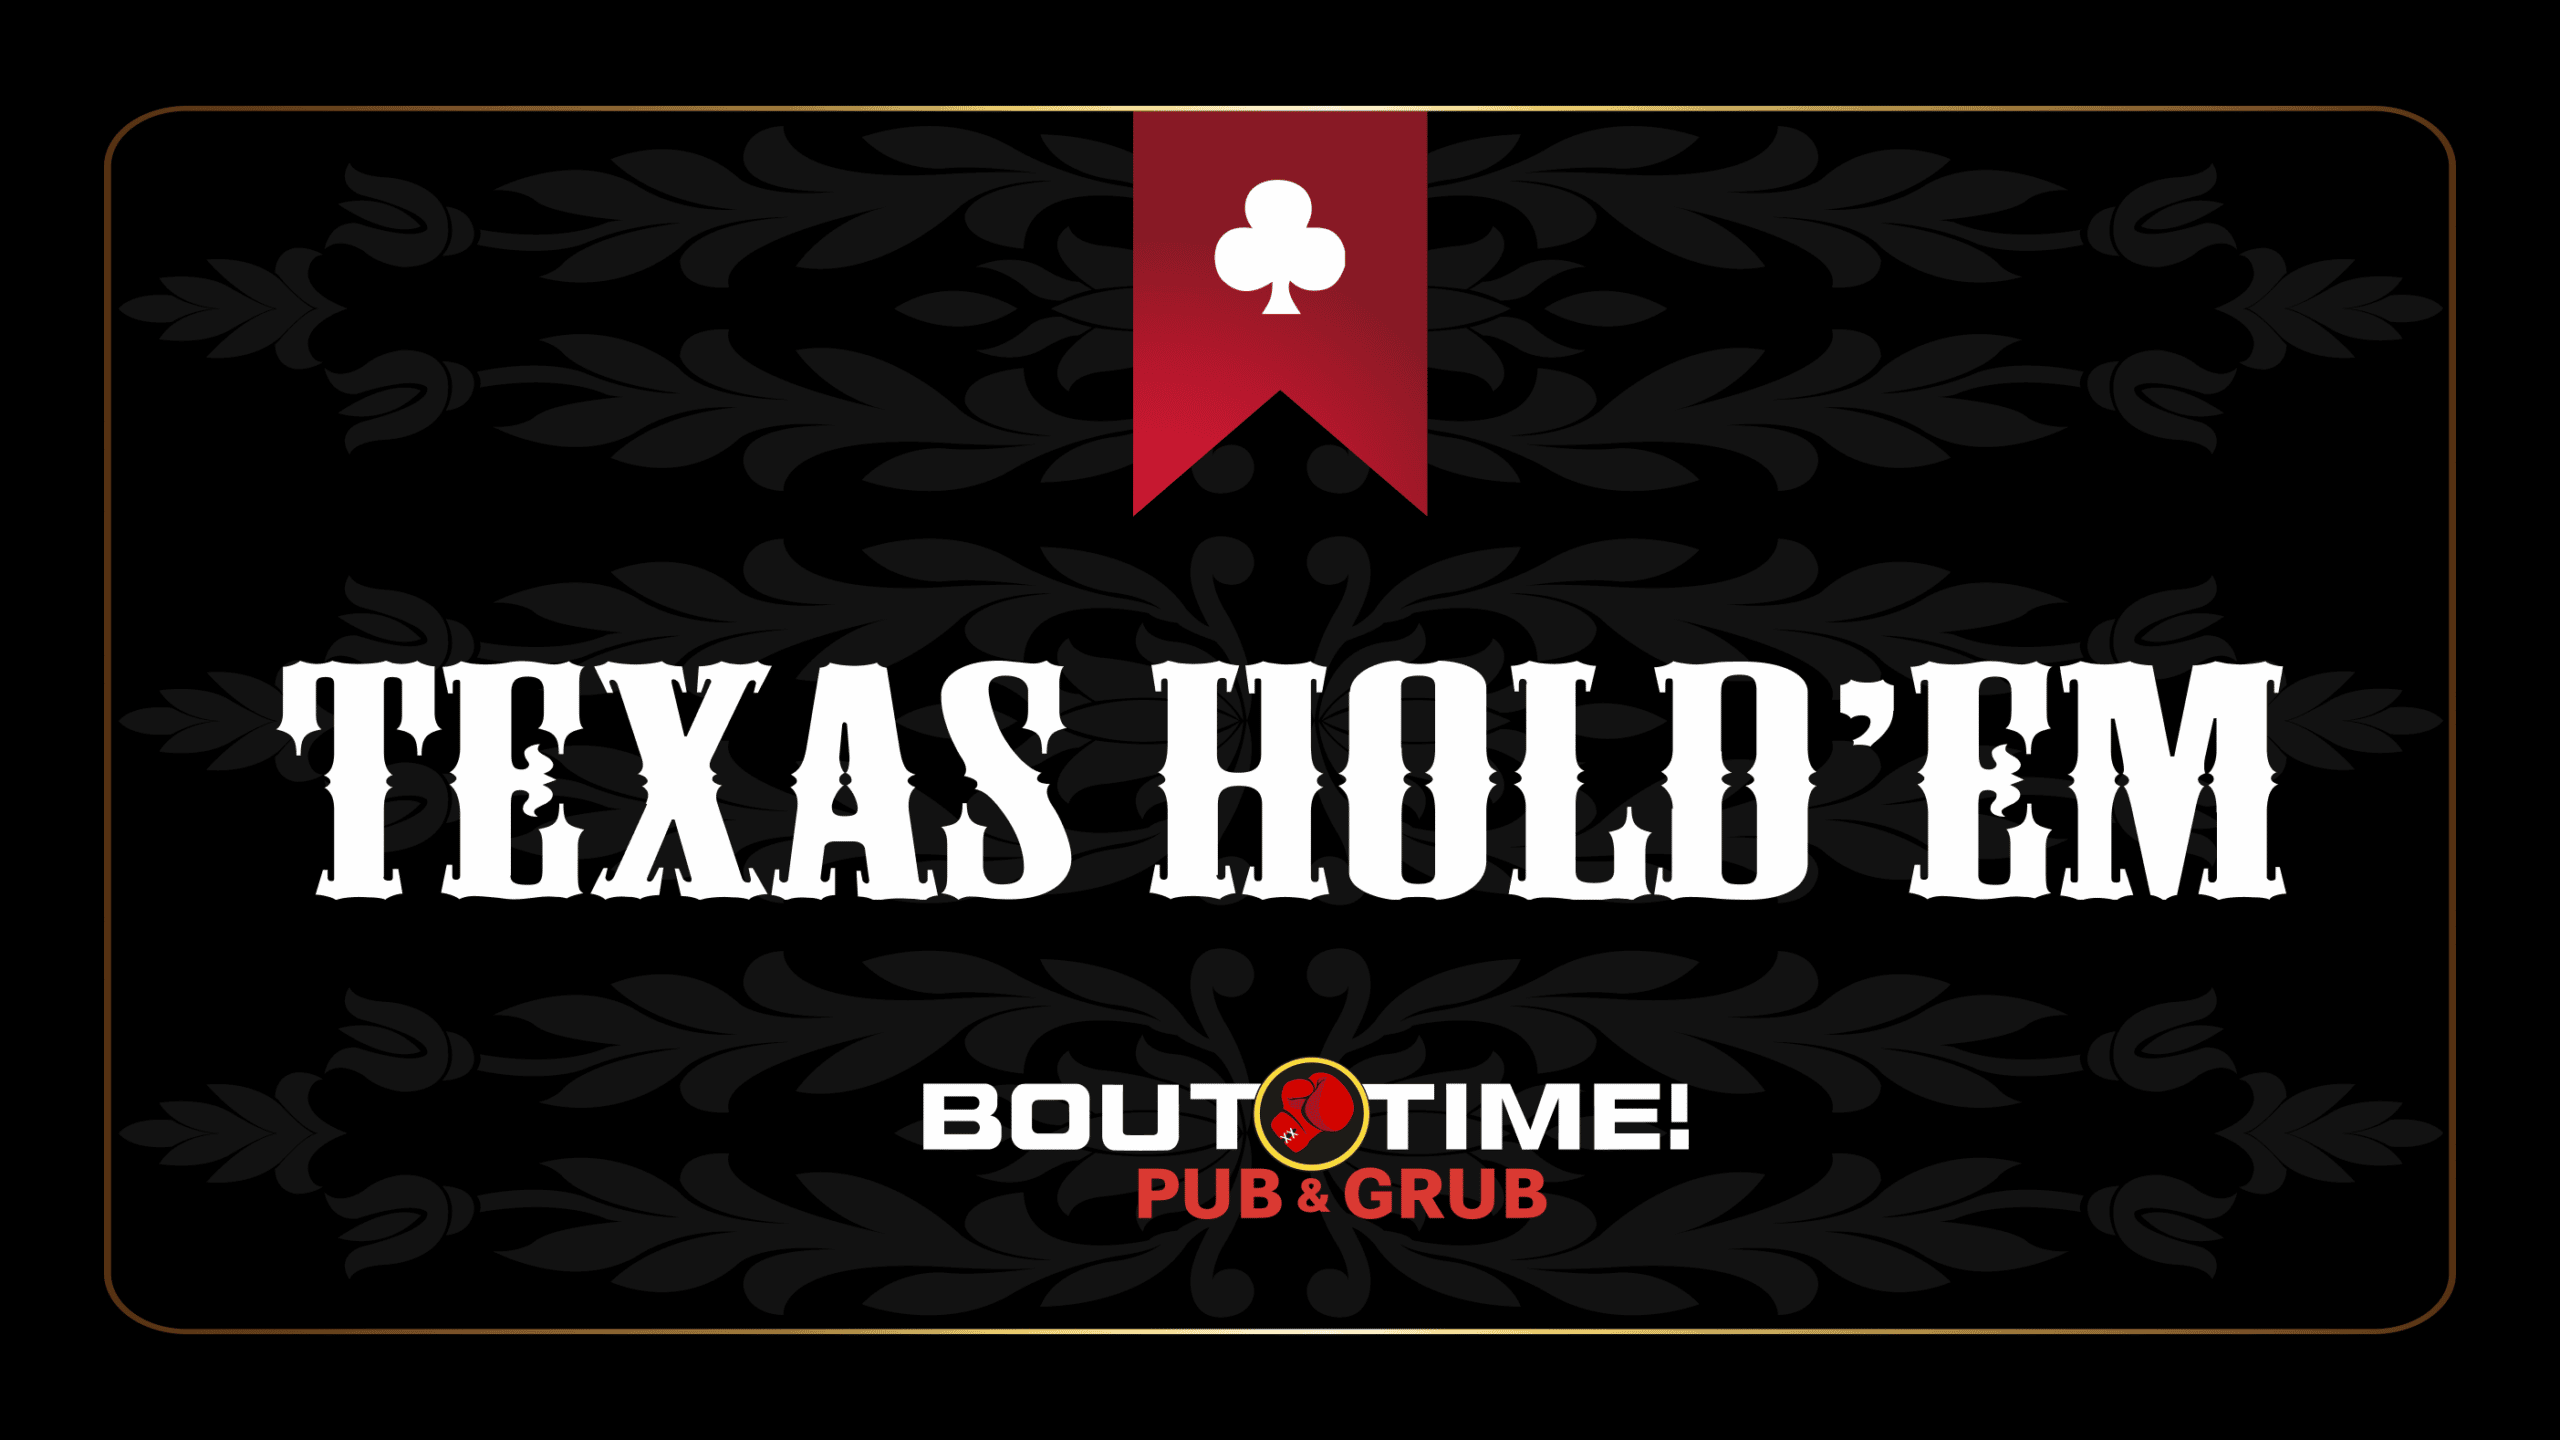 Texas Hold Em banner with a club on a banner and a light scrollwork design.